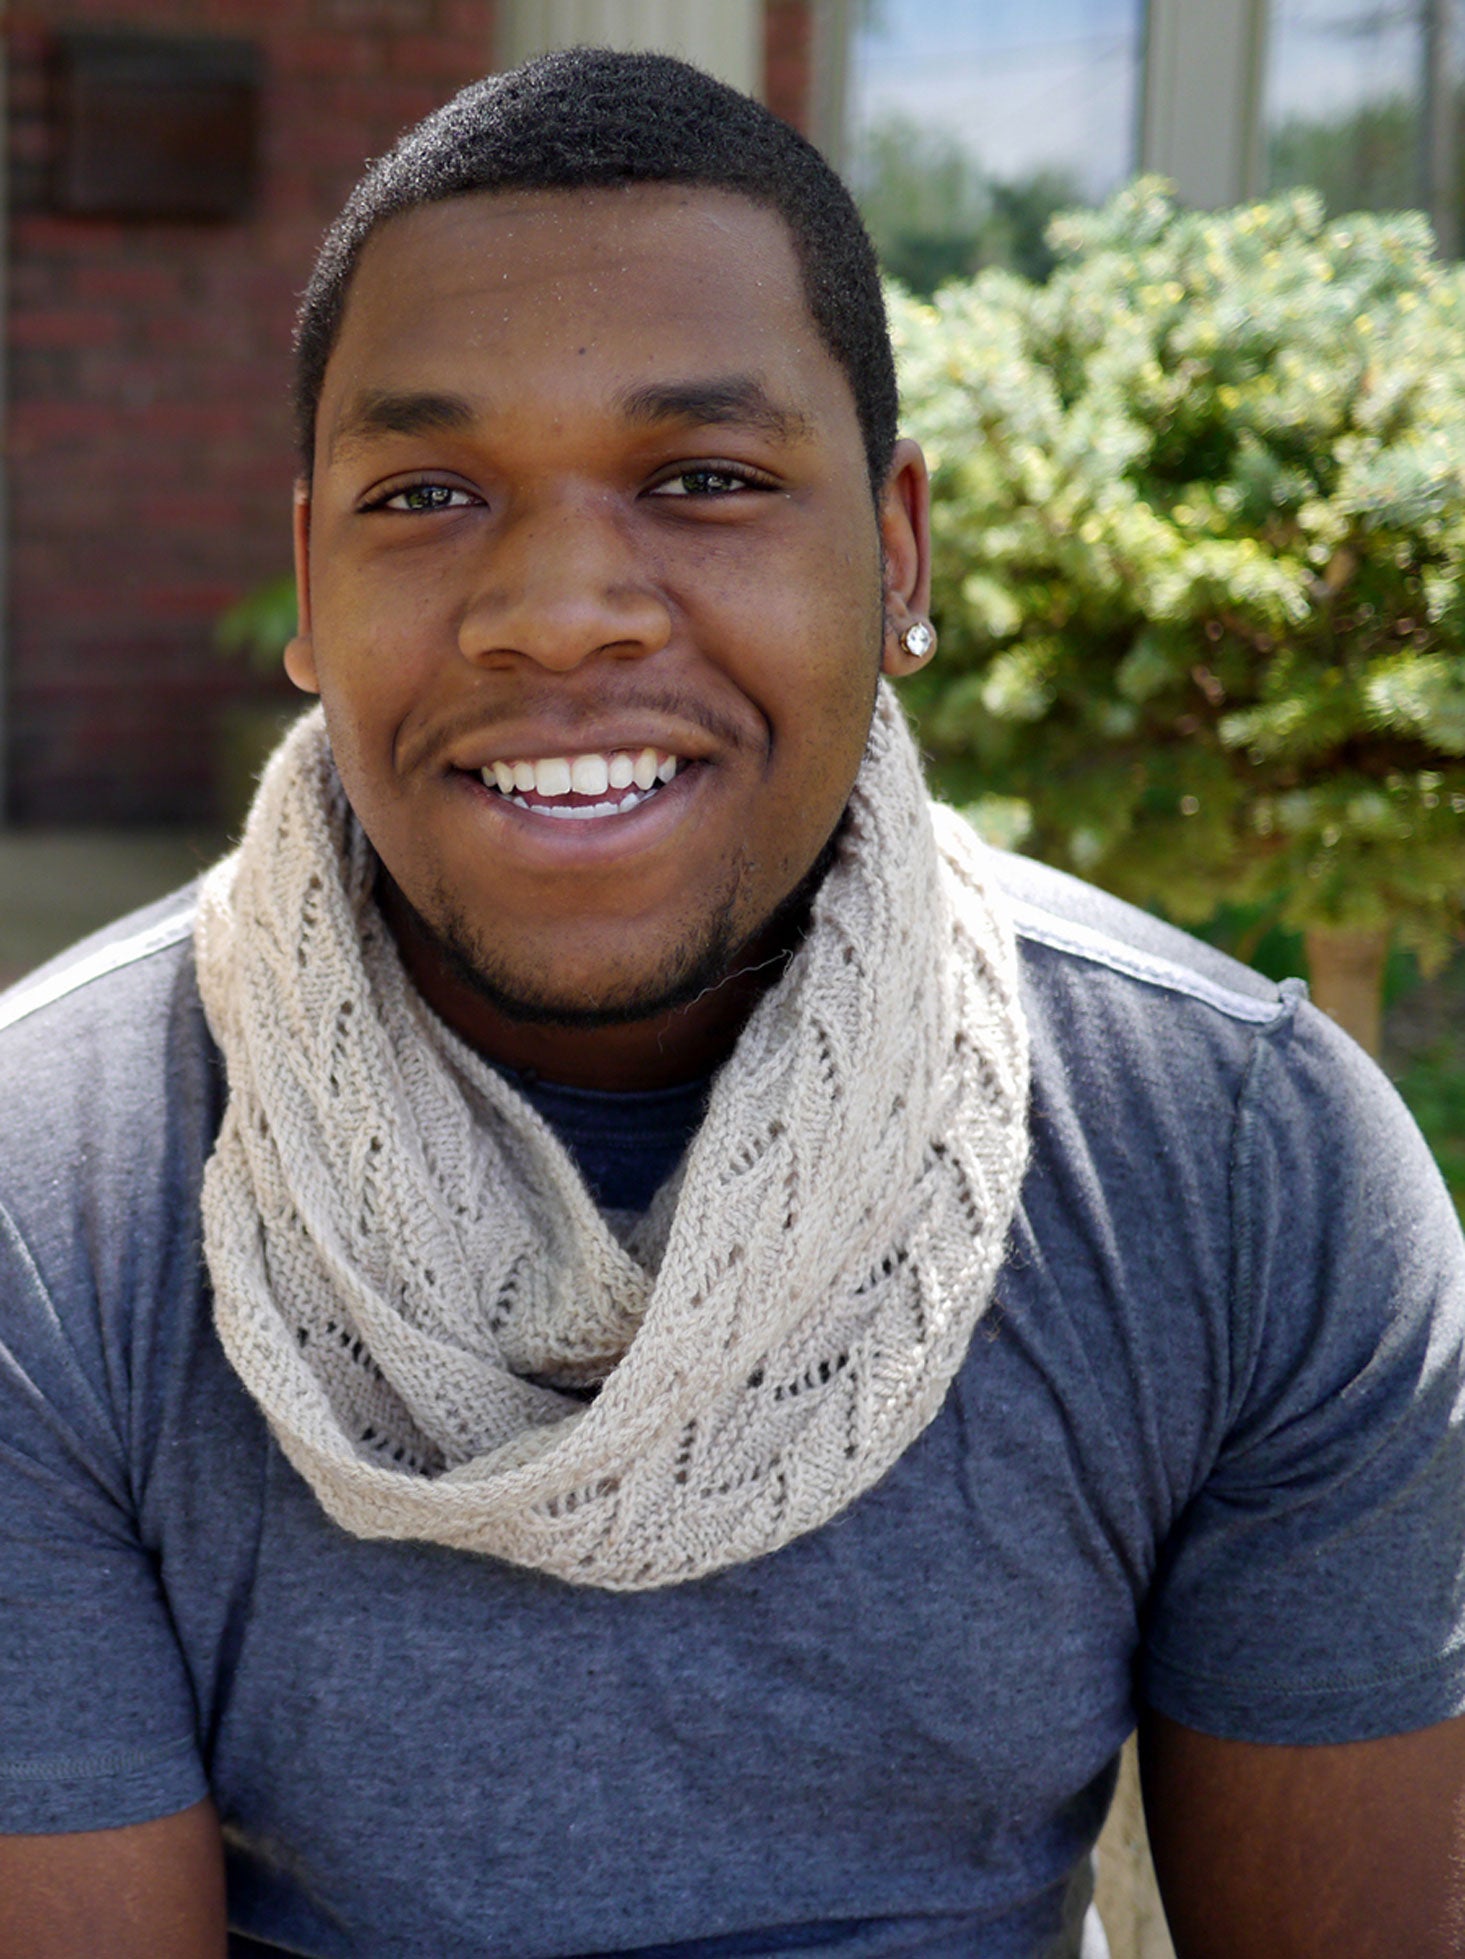 Sculling Cowl/Infinity Scarf